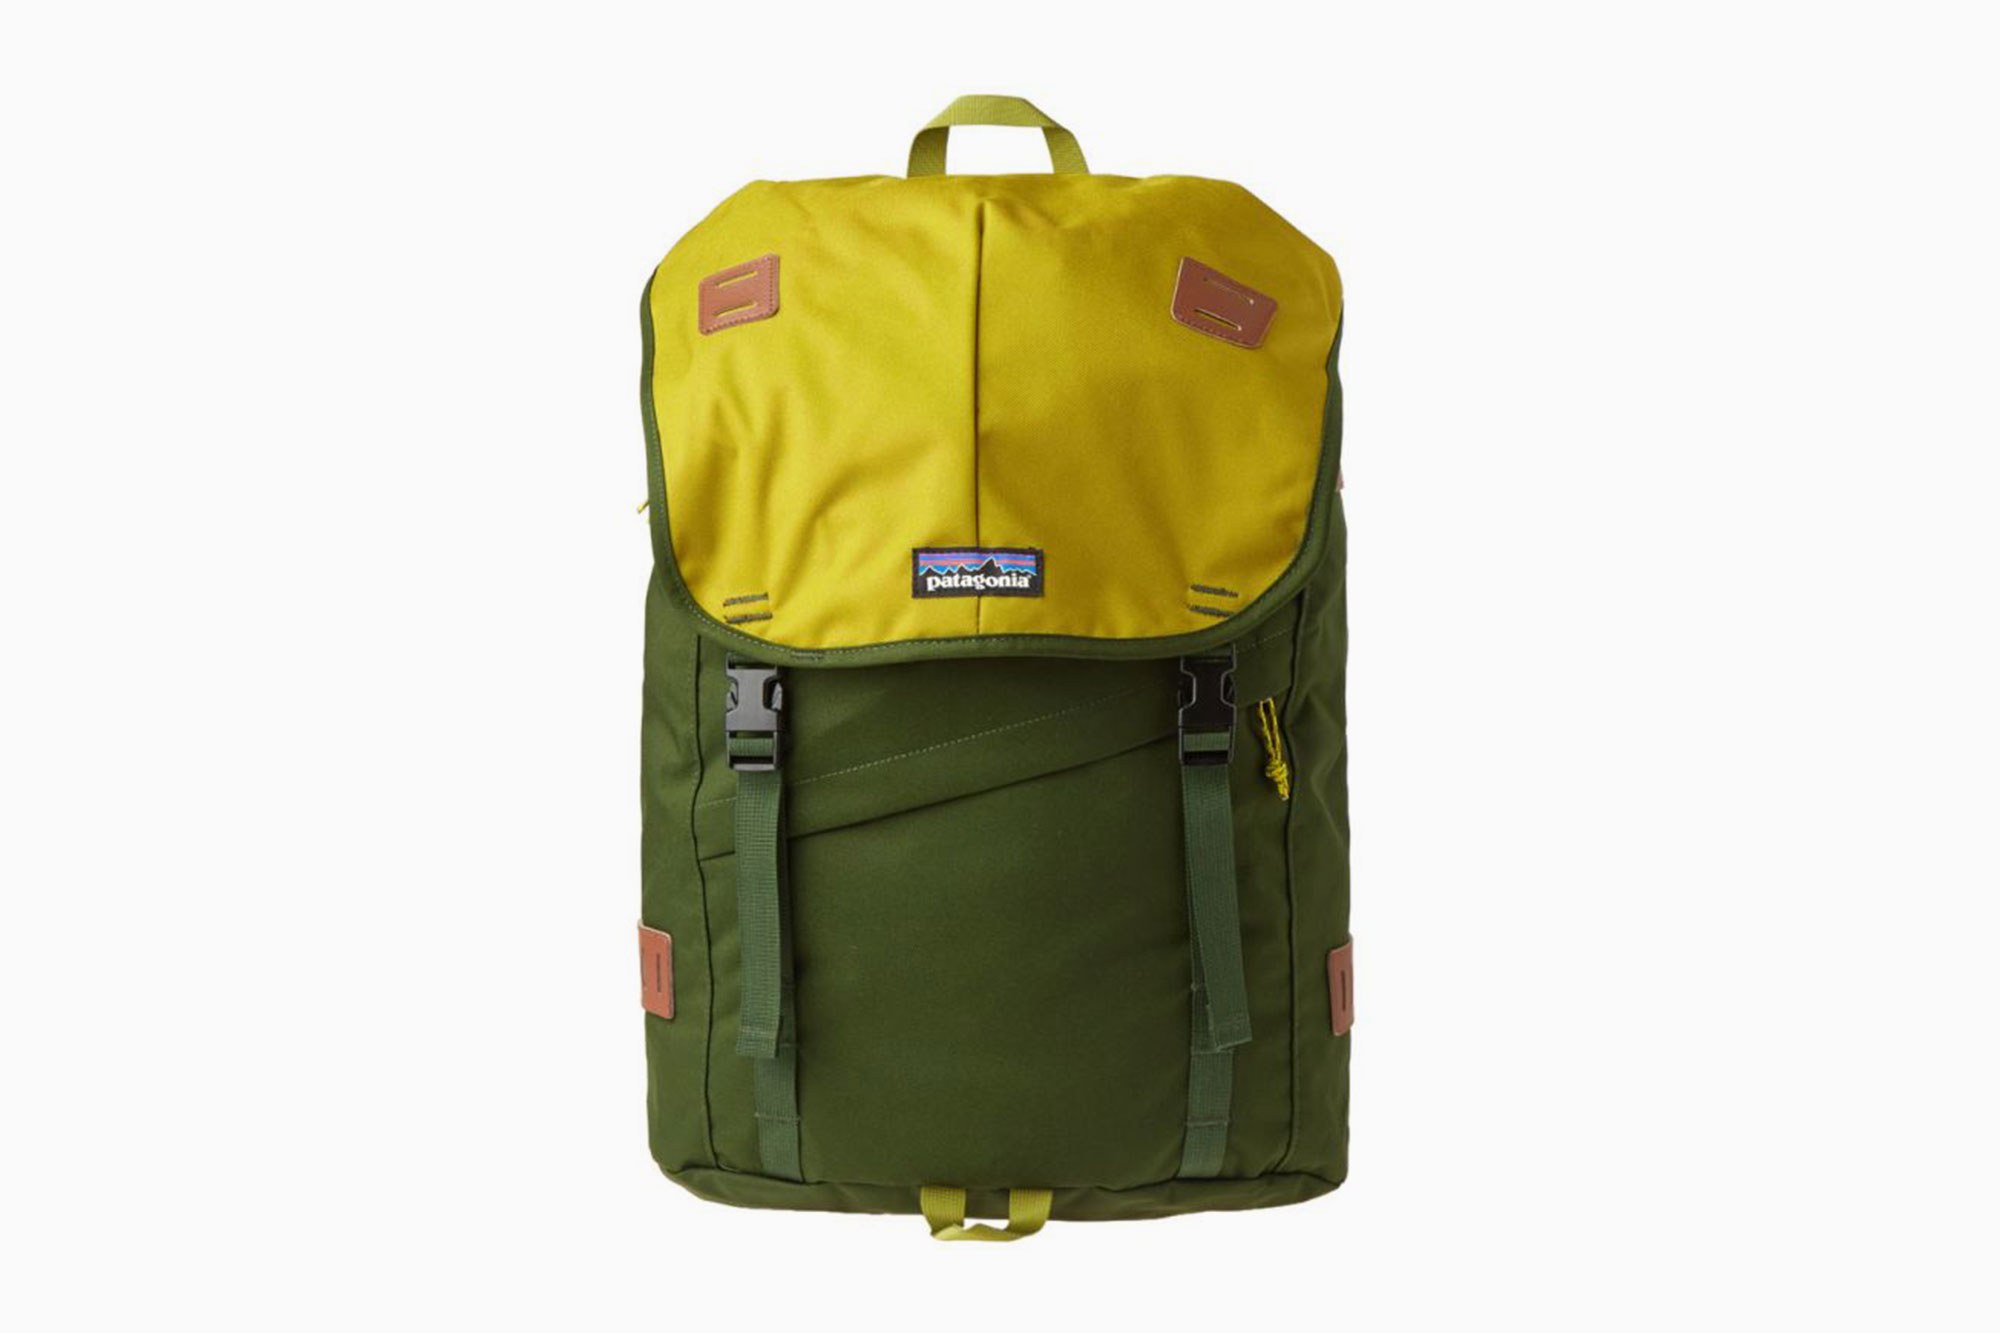 2017 08 Backpack Product Images 3x2 10